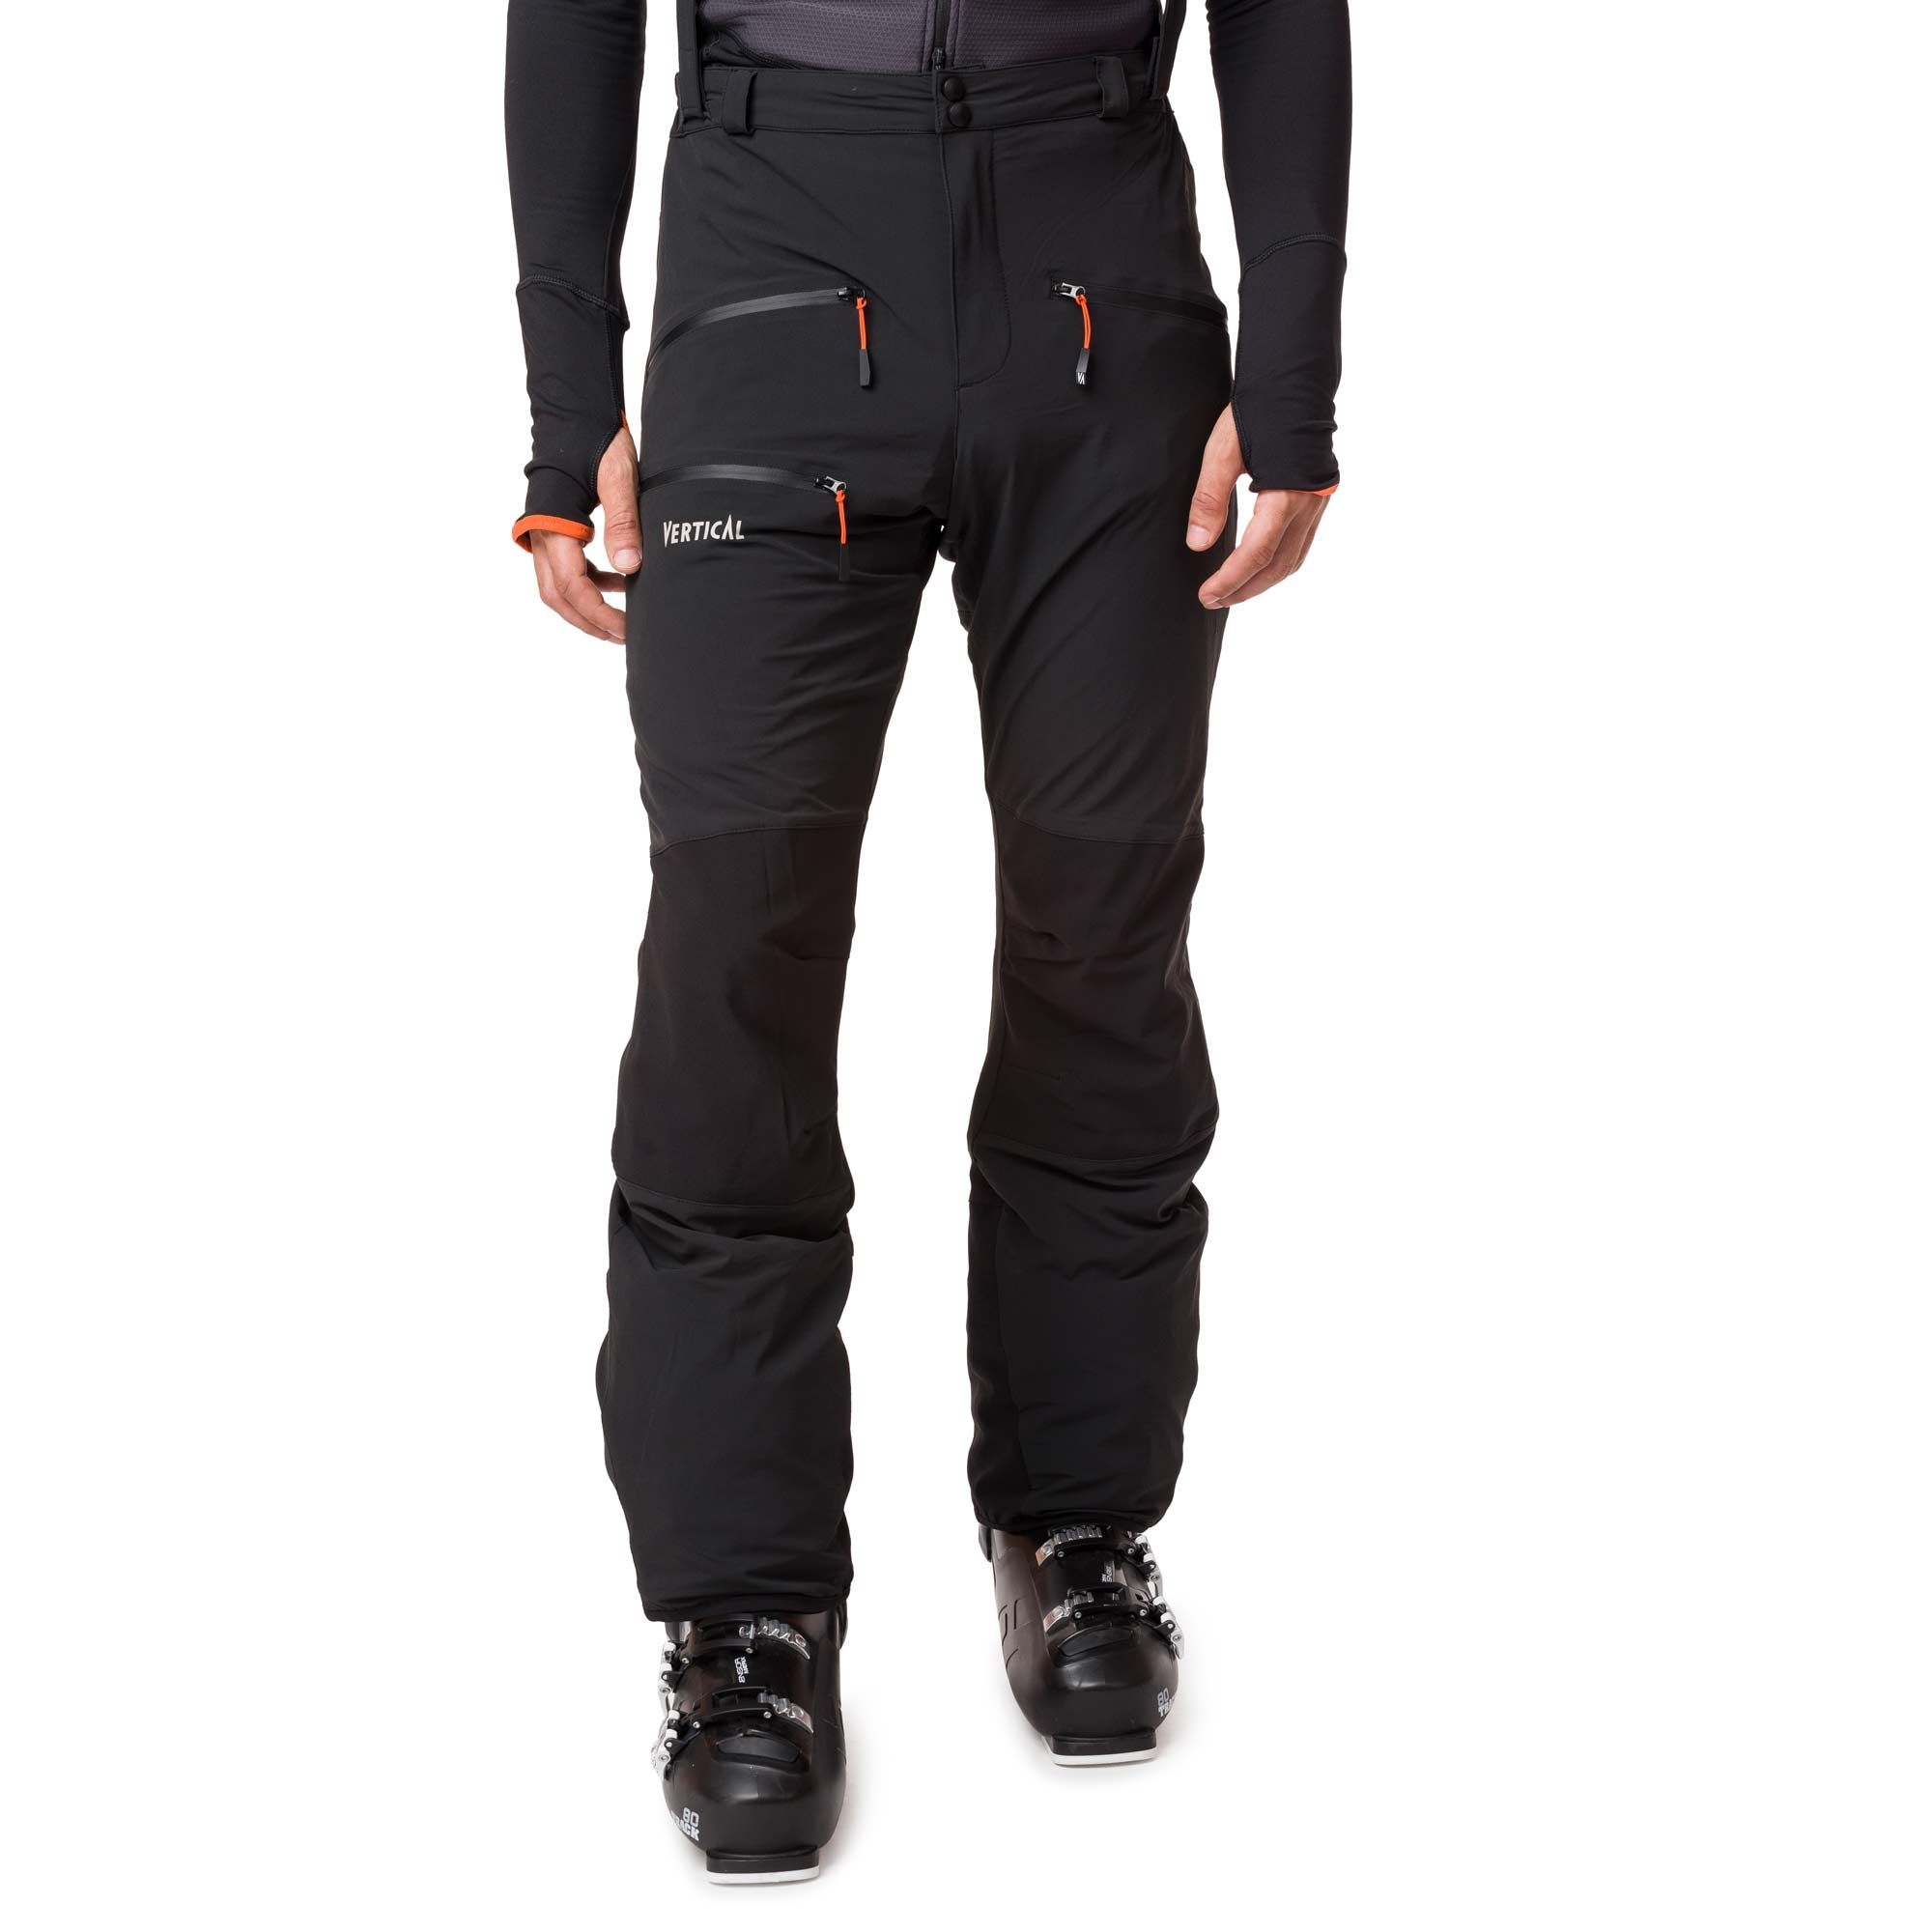 Vertical Windy Spirit MP+ Pant - Softshell trousers - Men's